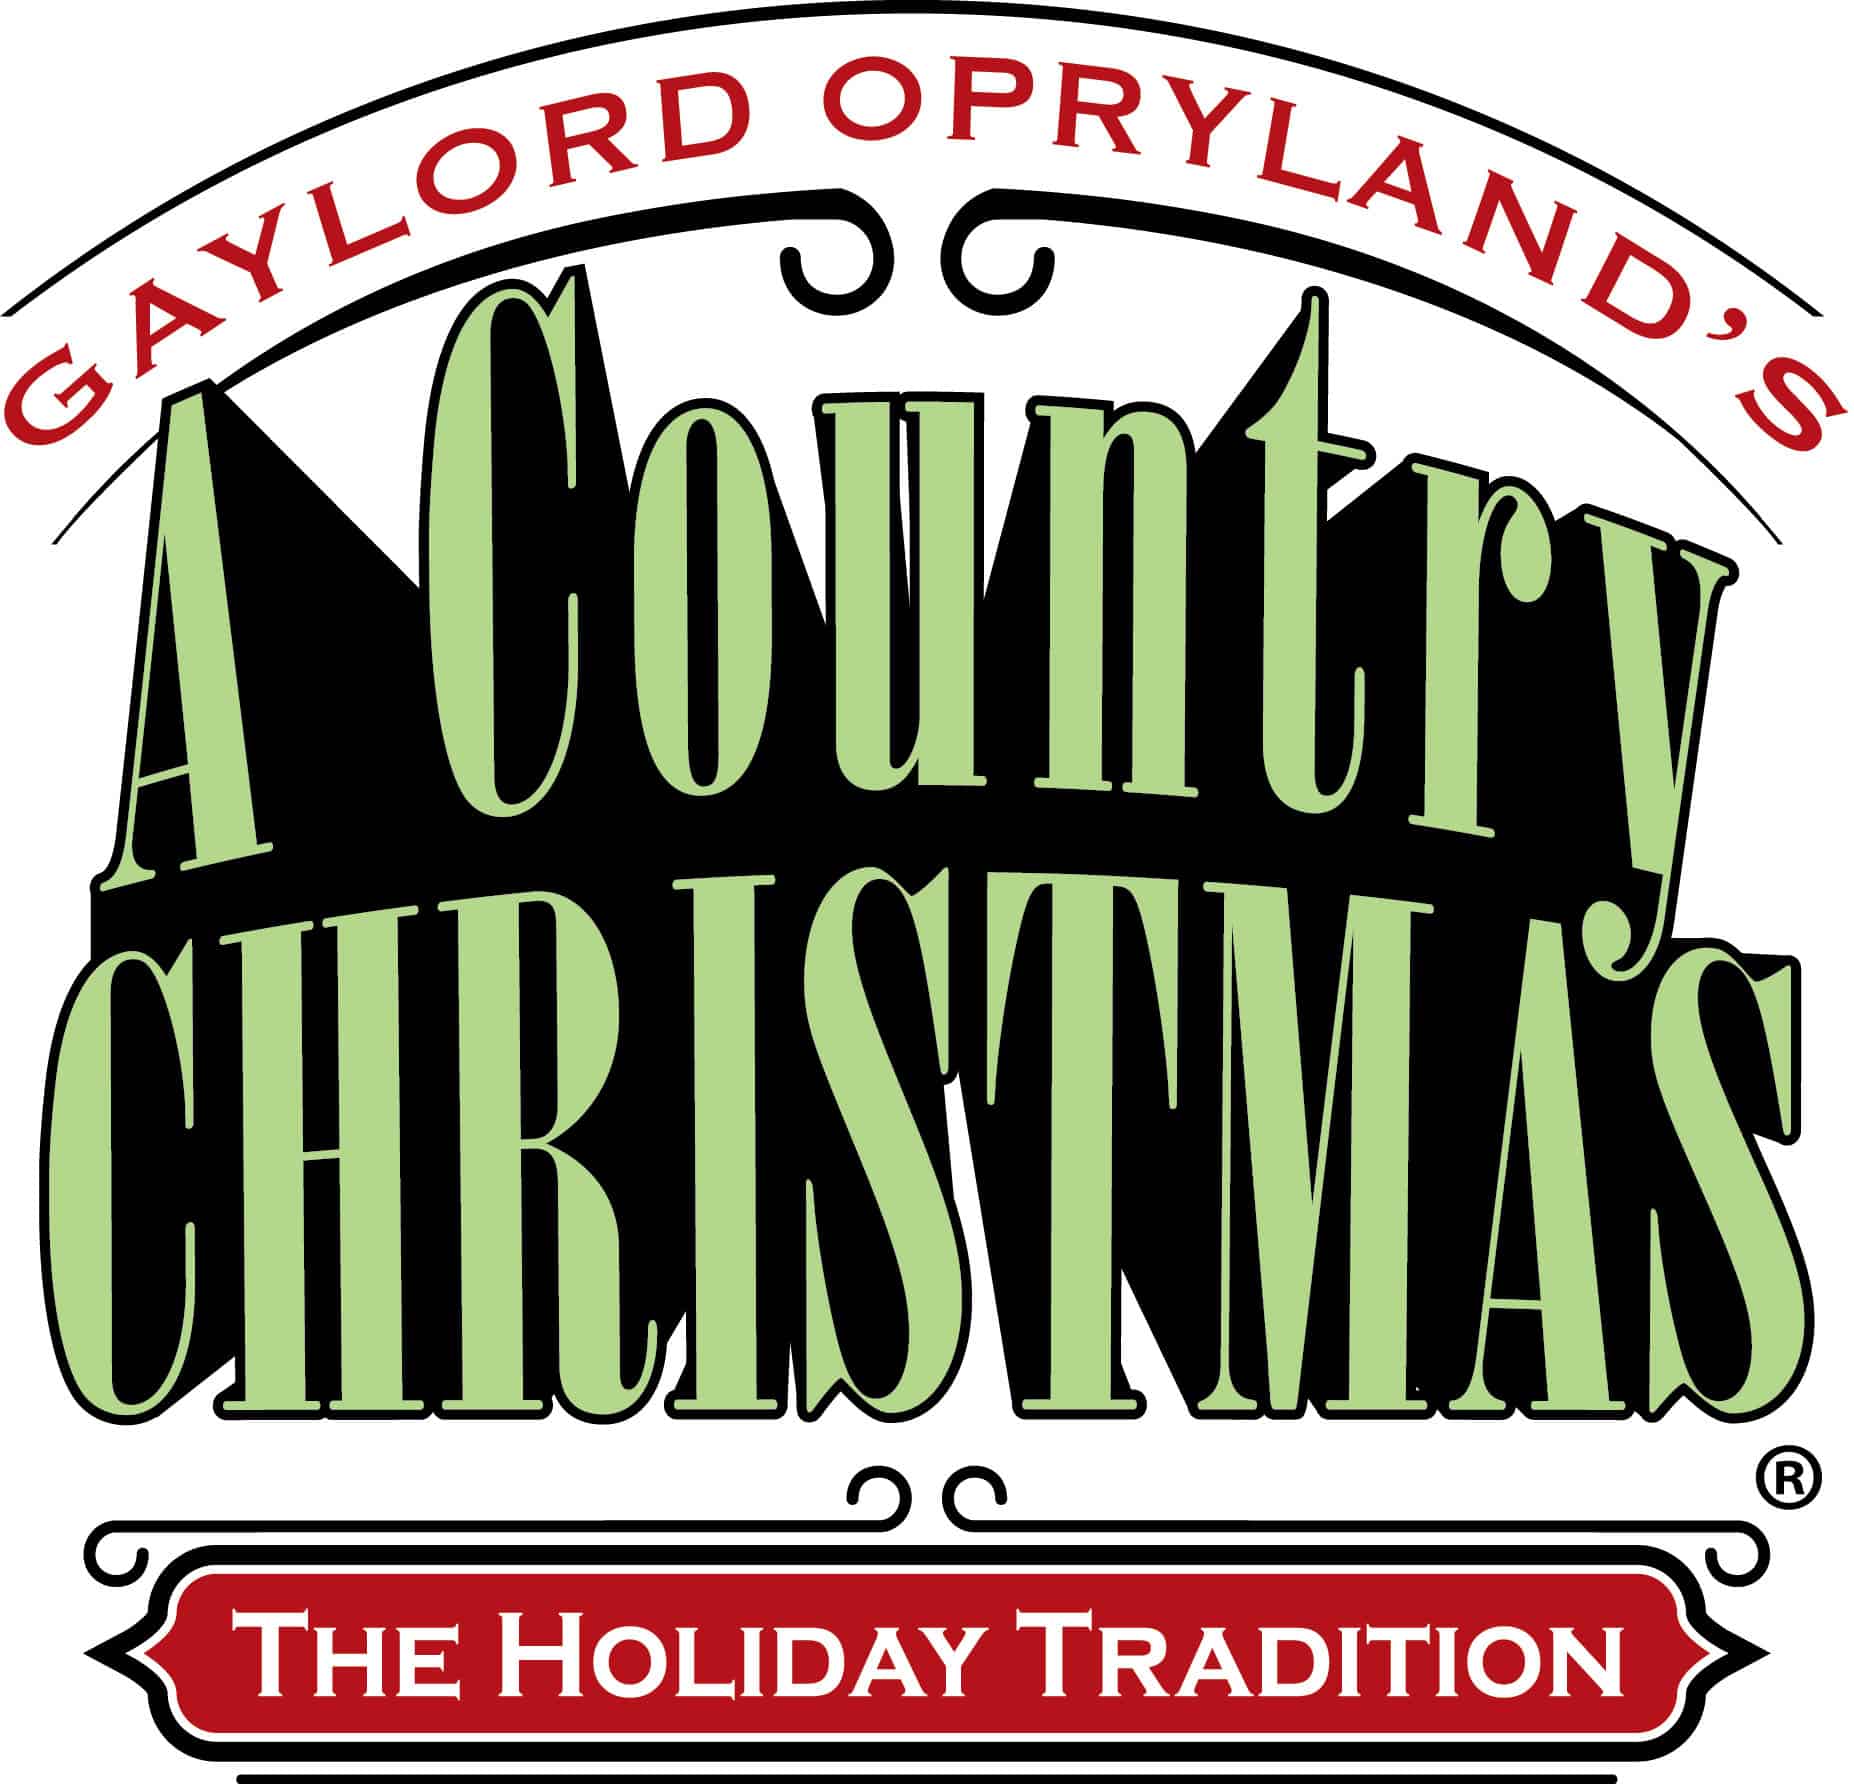 A Country Christmas Nashville TN-The Holiday Tradition_Gaylord Opryland_Logo.